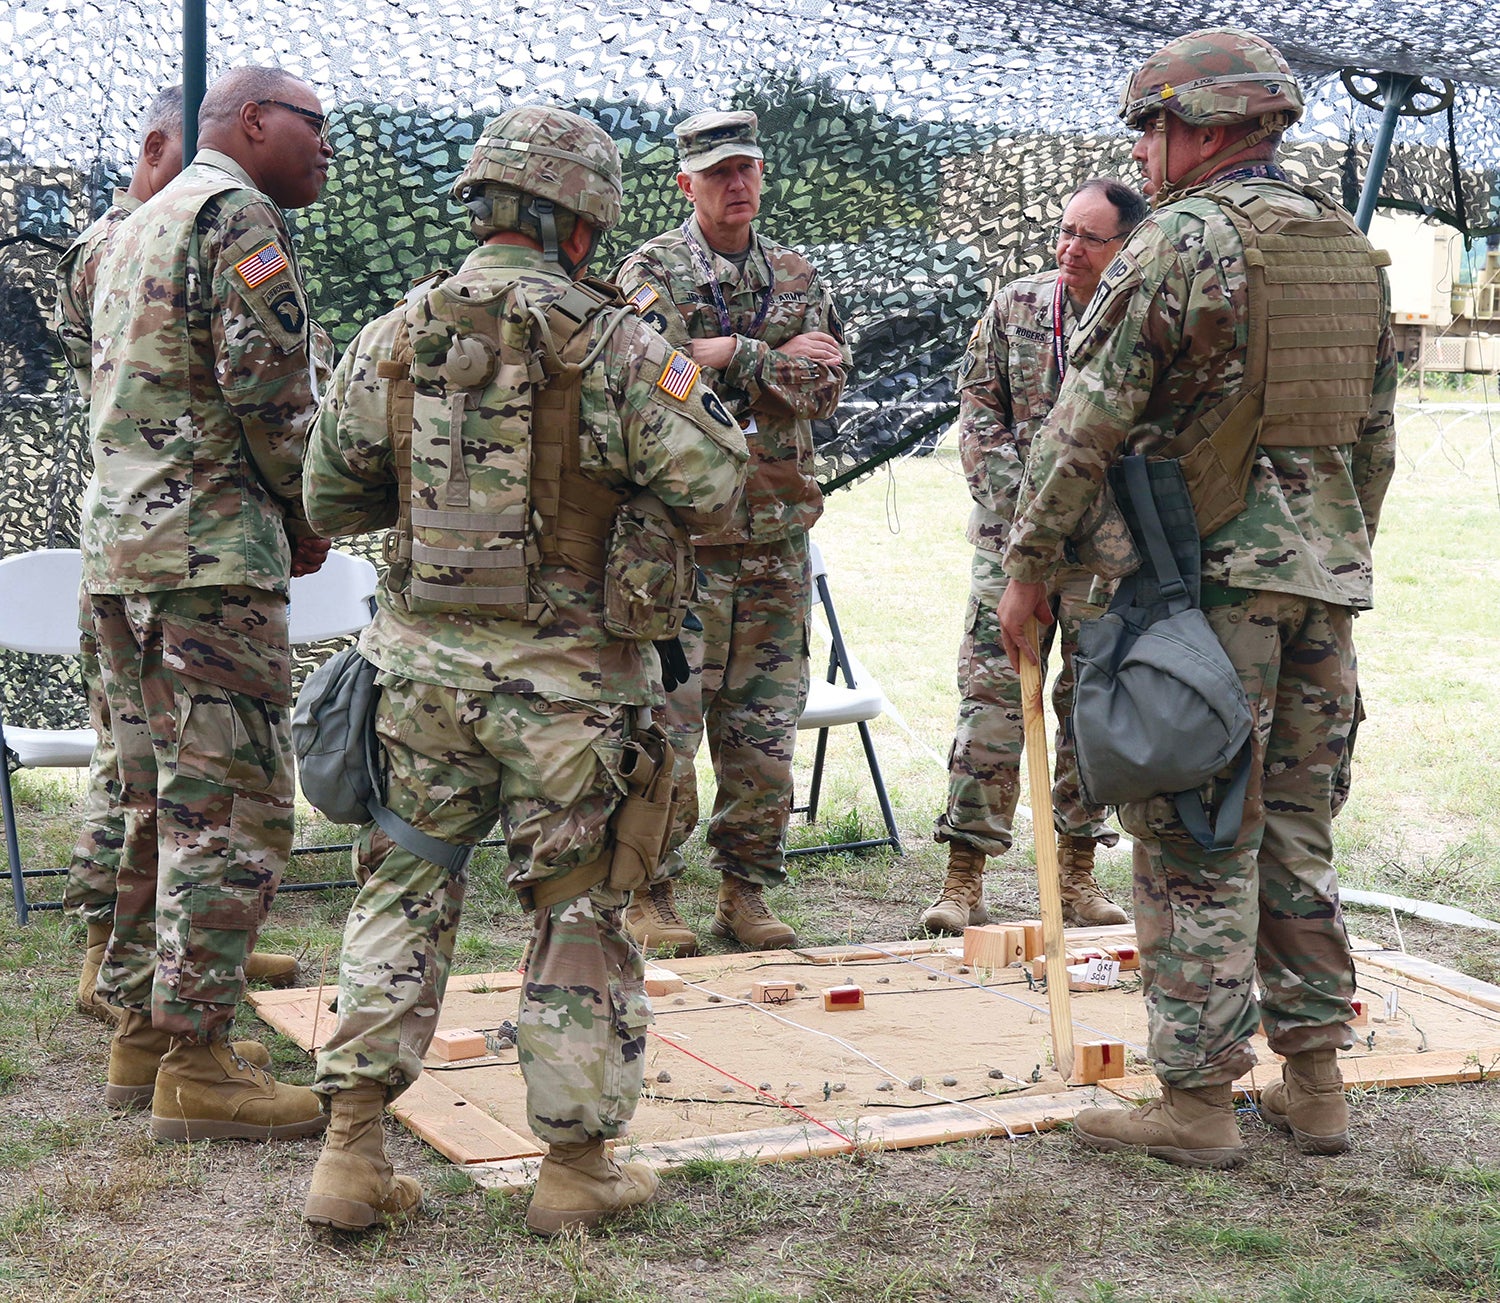 Army National Guard Director Lt. Gen. Jon Jensen, in cap, meets with Guard soldiers at Camp Grayling Joint Maneuver Training Center, Michigan. (Credit: Michigan National Guard)